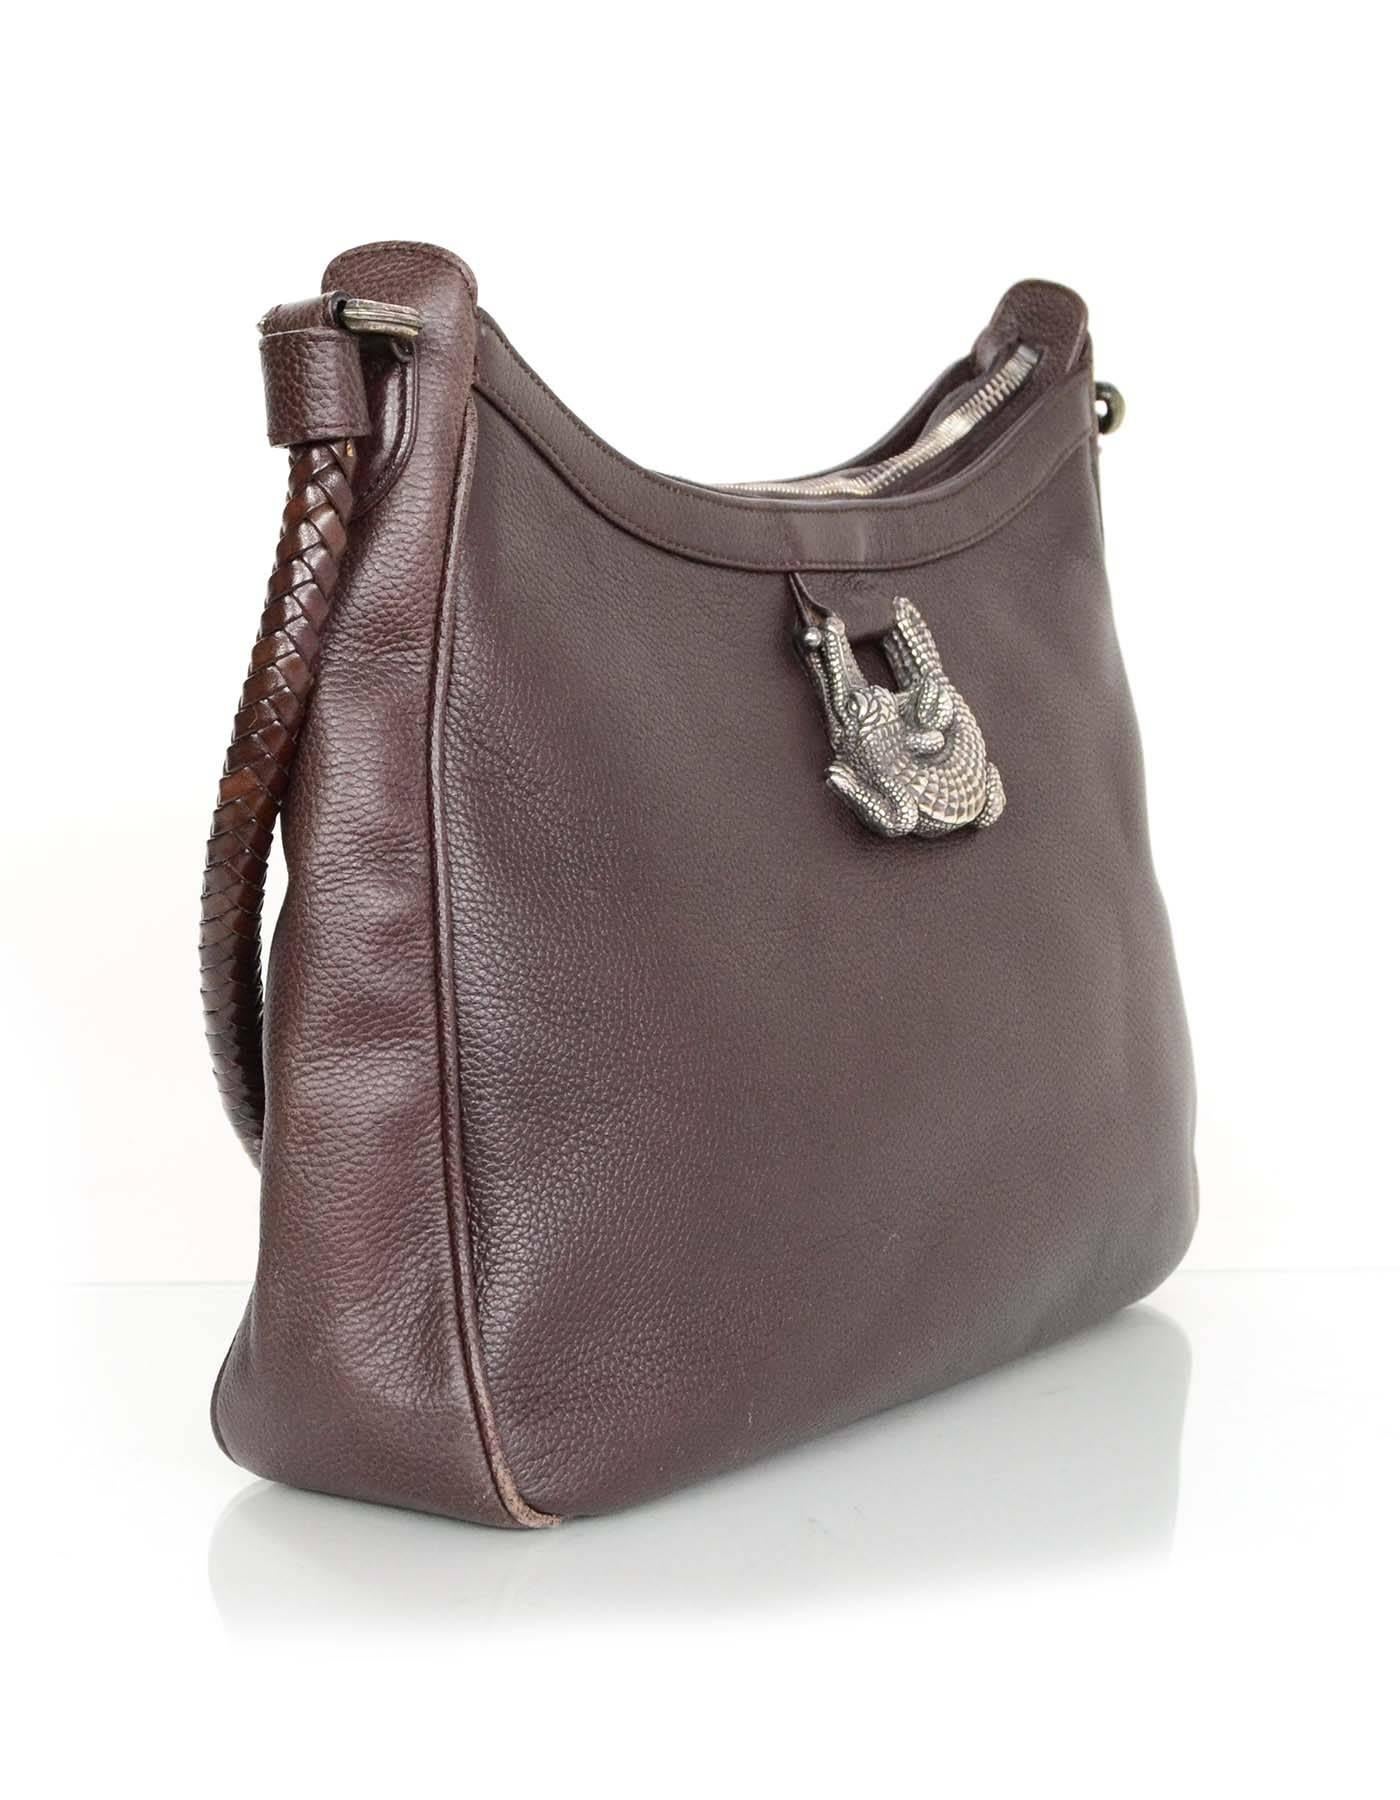 Barry Kieselstein-Cord Brown Leather Shoulder Bag
Features sterling silver hardware

Made In: Itay
Year of Production: 1993
Color: Brown
Hardware: Sterling silver
Materials: Leather and sterling silver
Lining: Green suede
Closure/Opening: Zip across